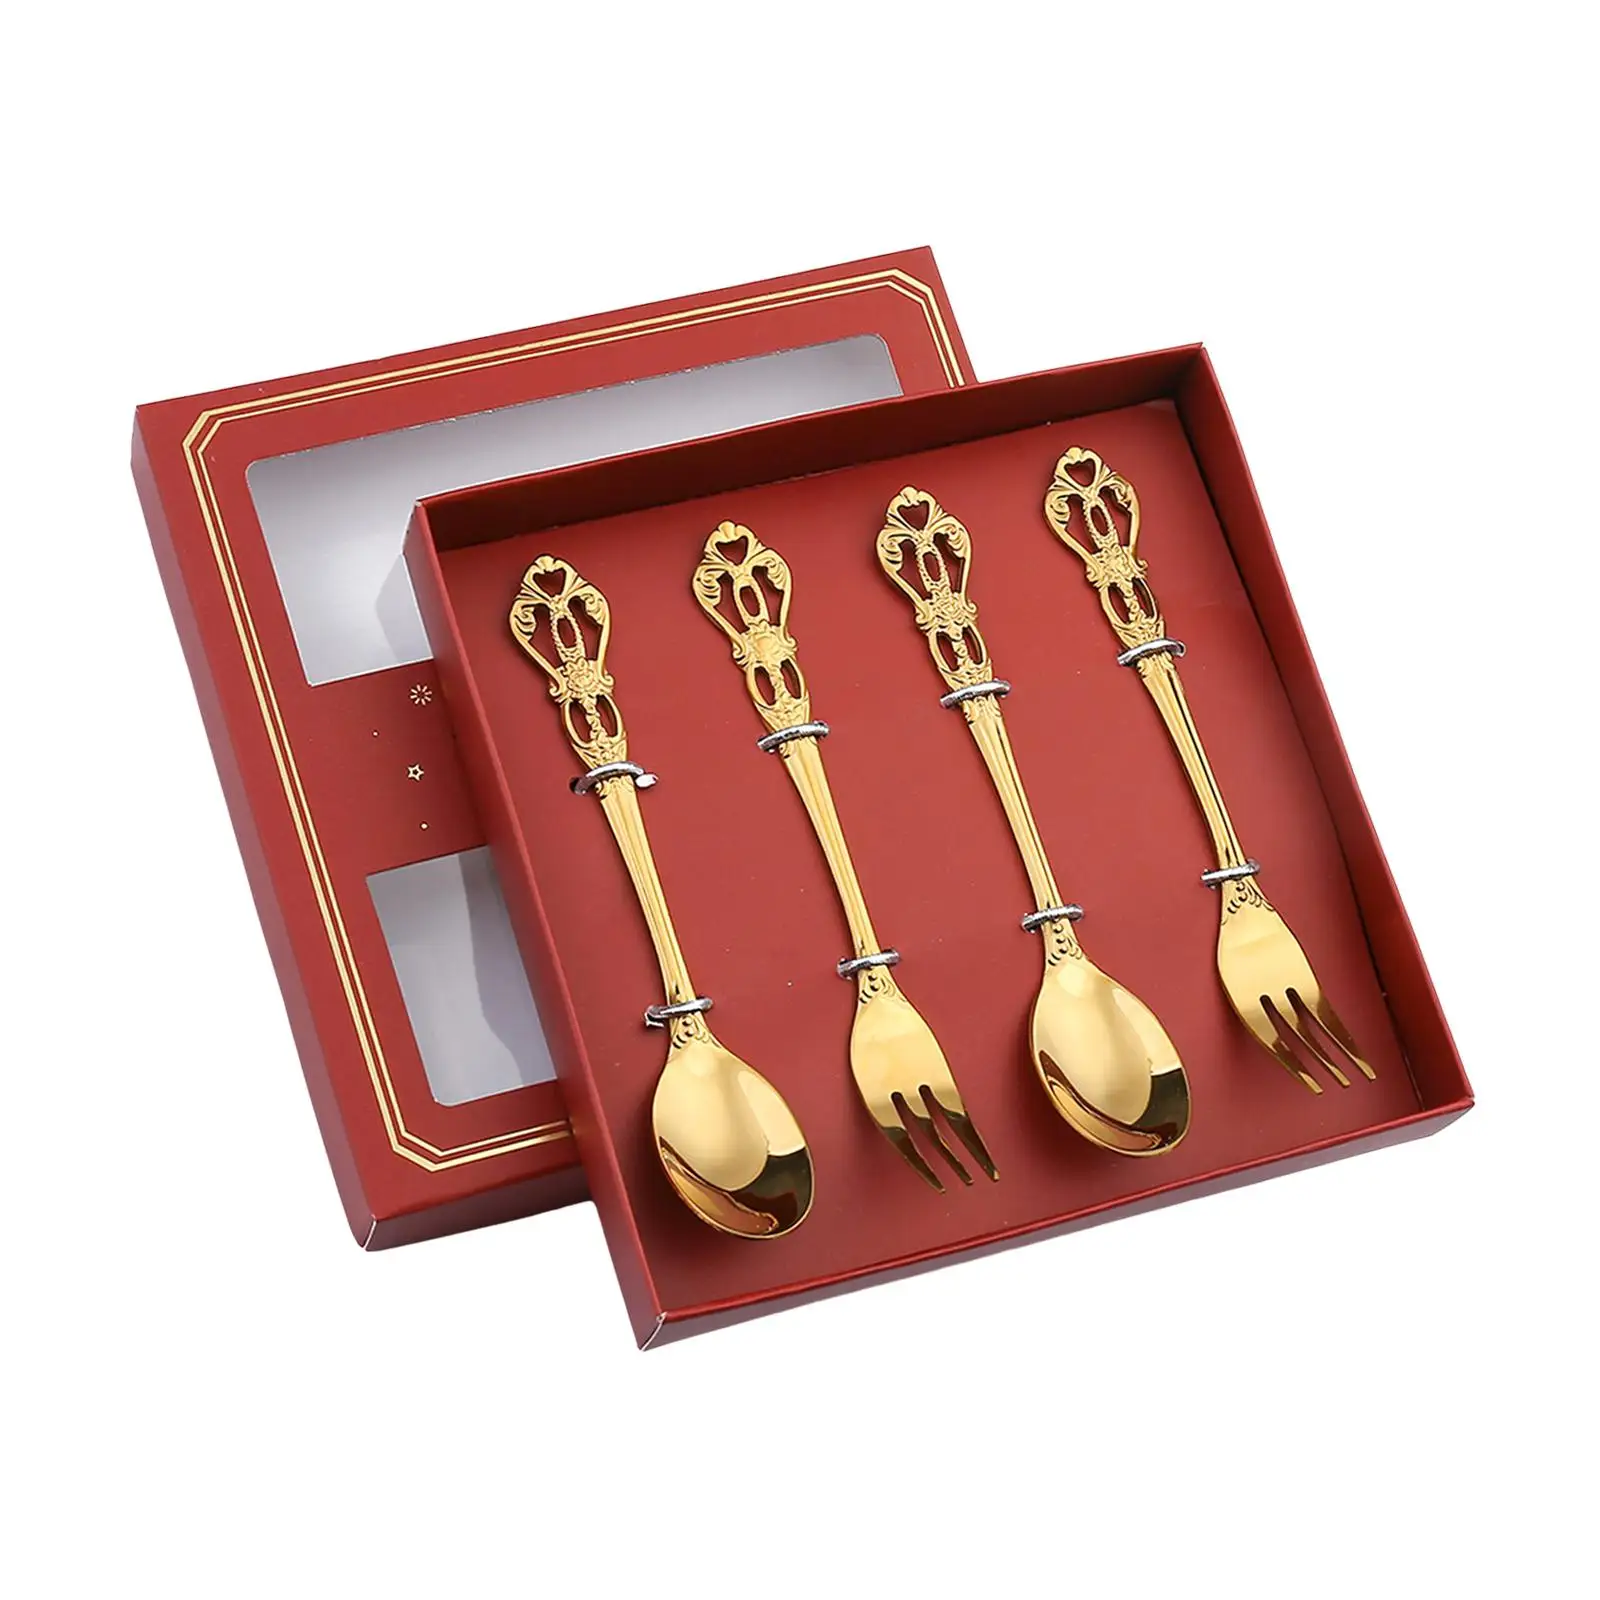 4Pcs Spoons Forks Set Stainless Steel with Gift Box Pastry Forks and Tea Spoon Set for Wedding Sugar Ice Cream Salad Cake